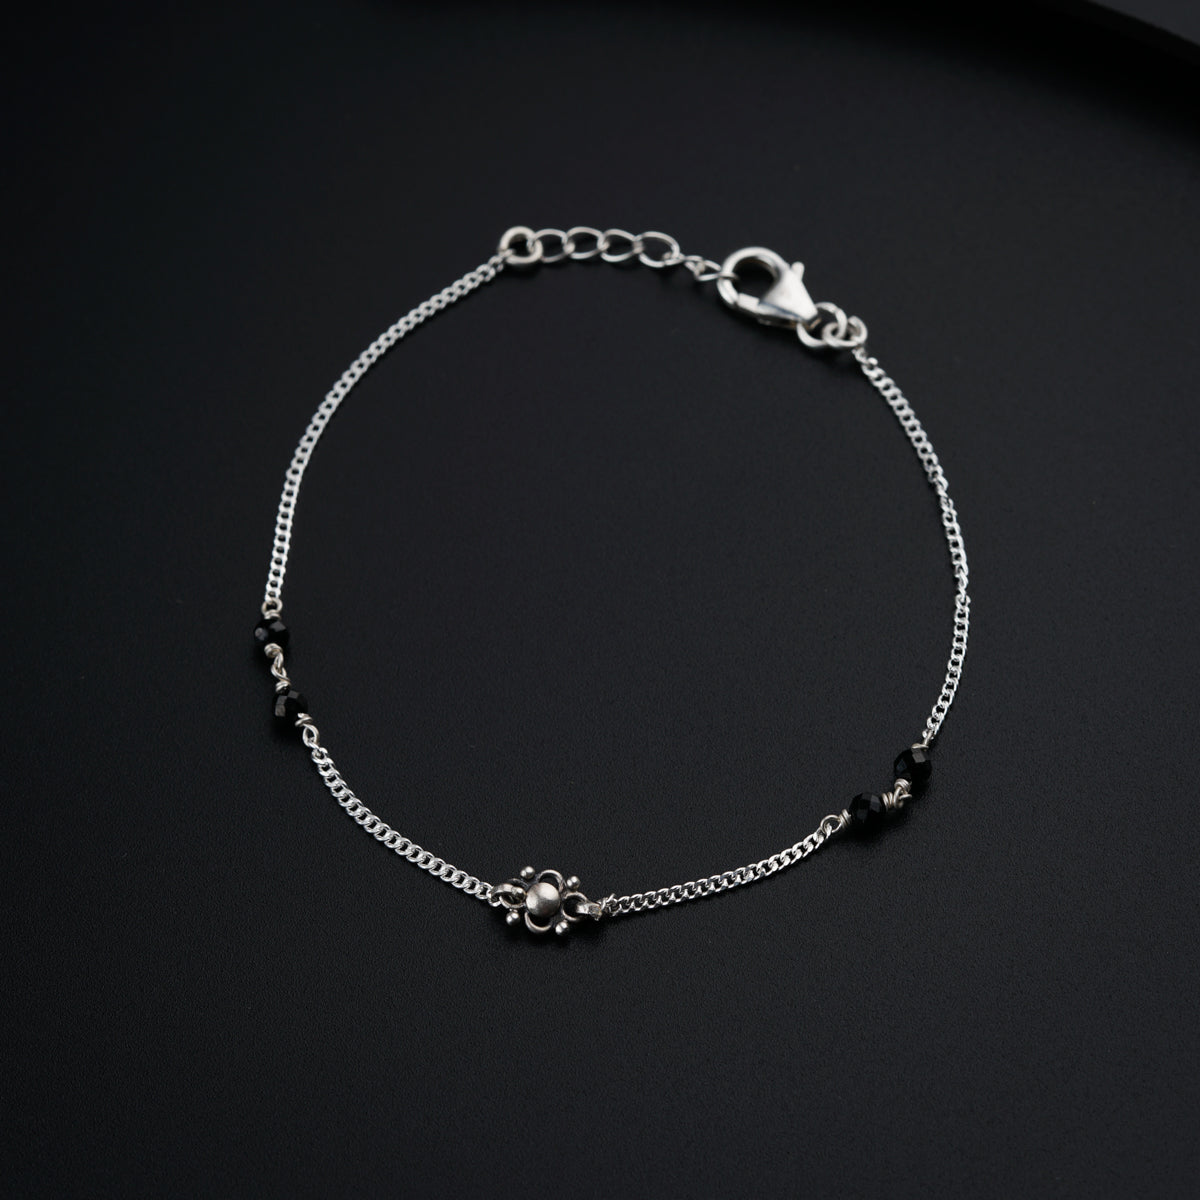 a silver bracelet with black beads on a black surface